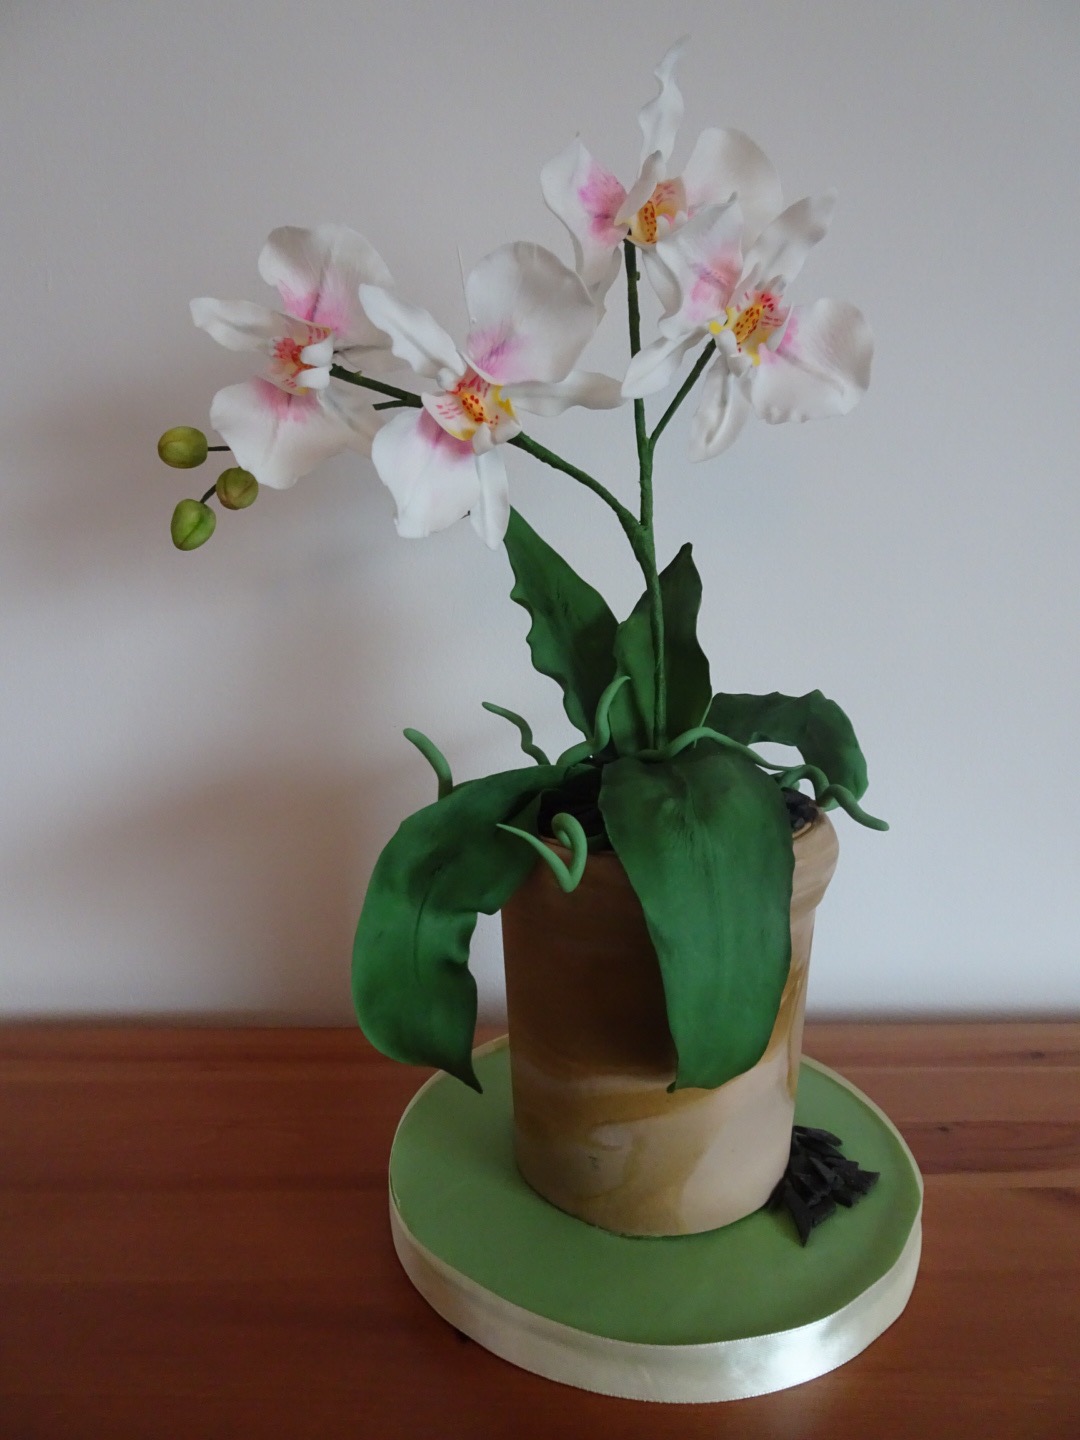 Sue Power - Moth Orchid flowers & leaves - January 2022